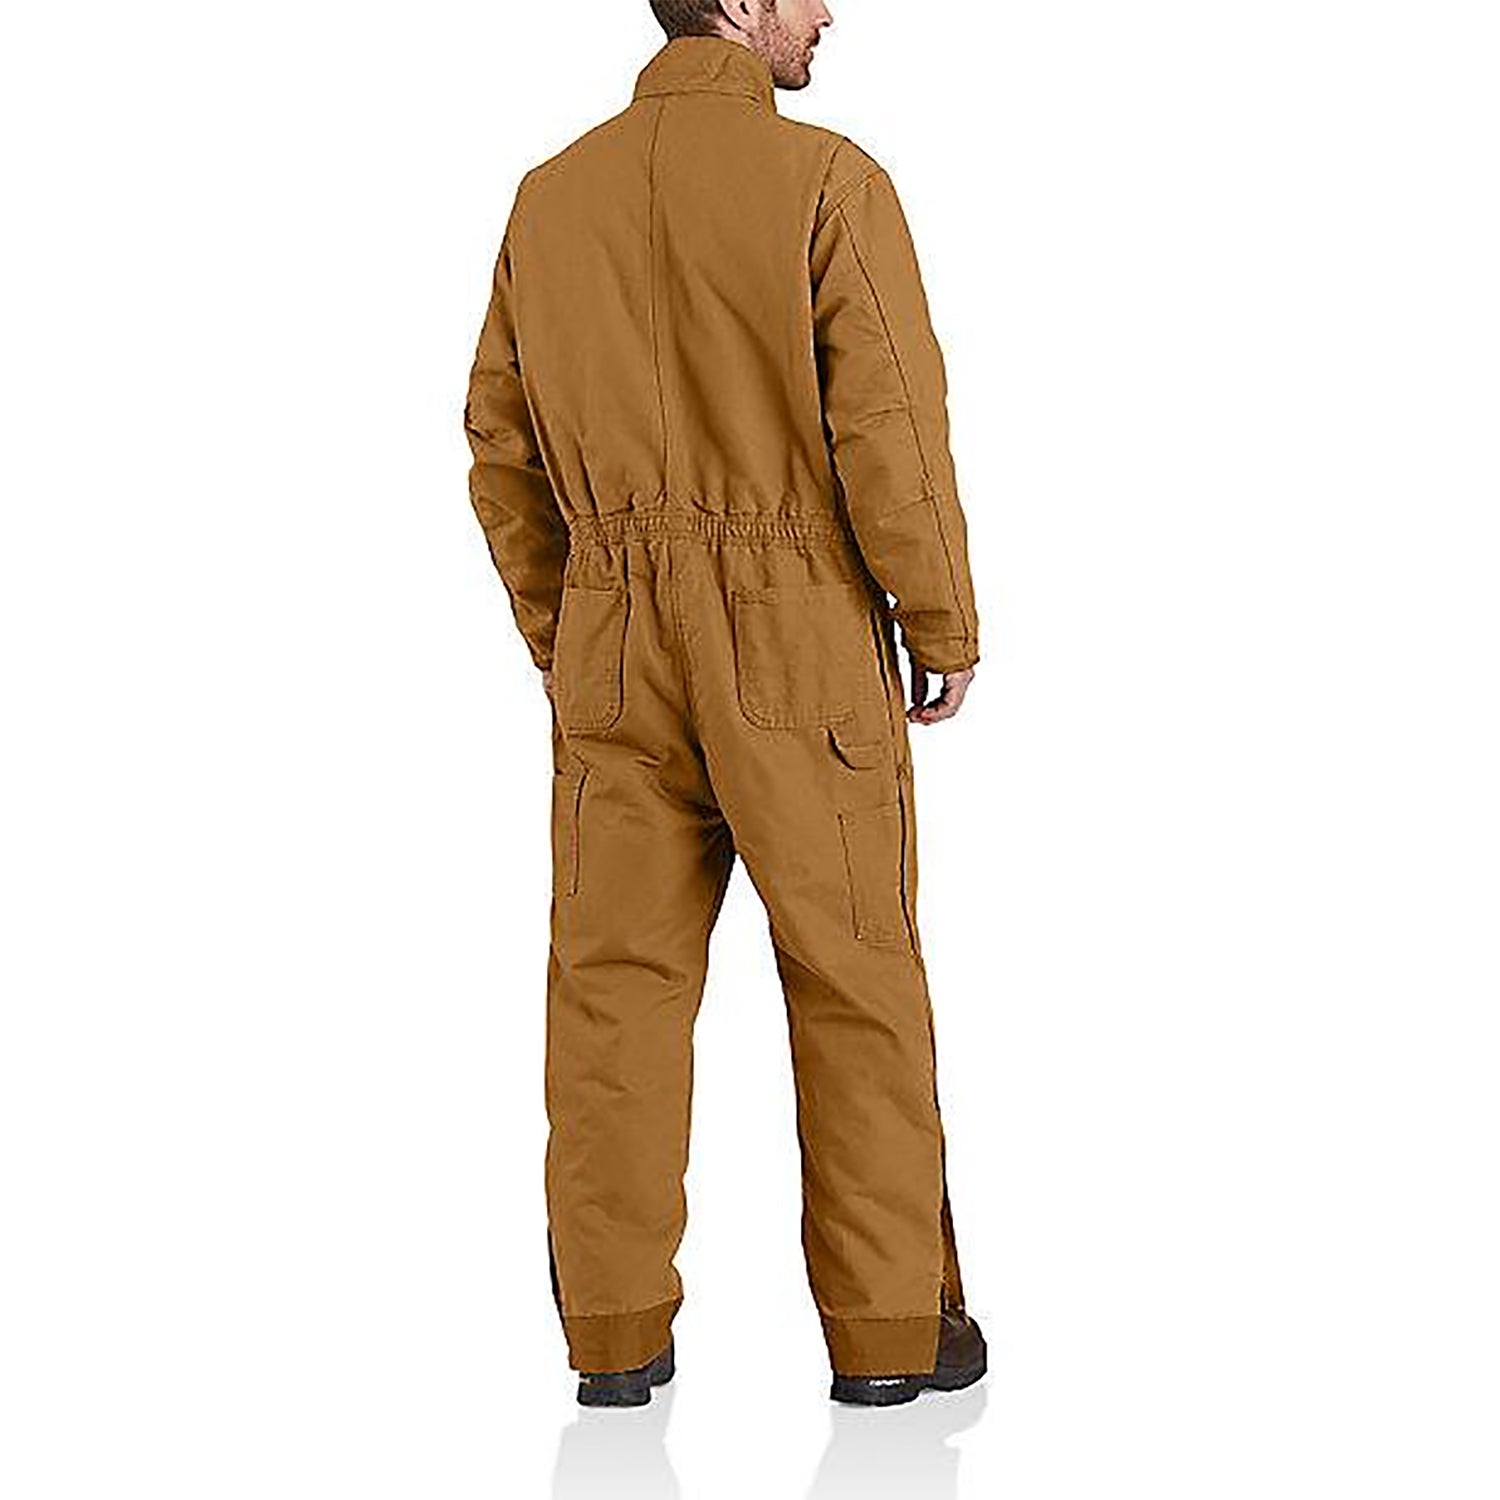 Carhartt Washed Duck Insulated Coverall 104396 – Good's Store Online